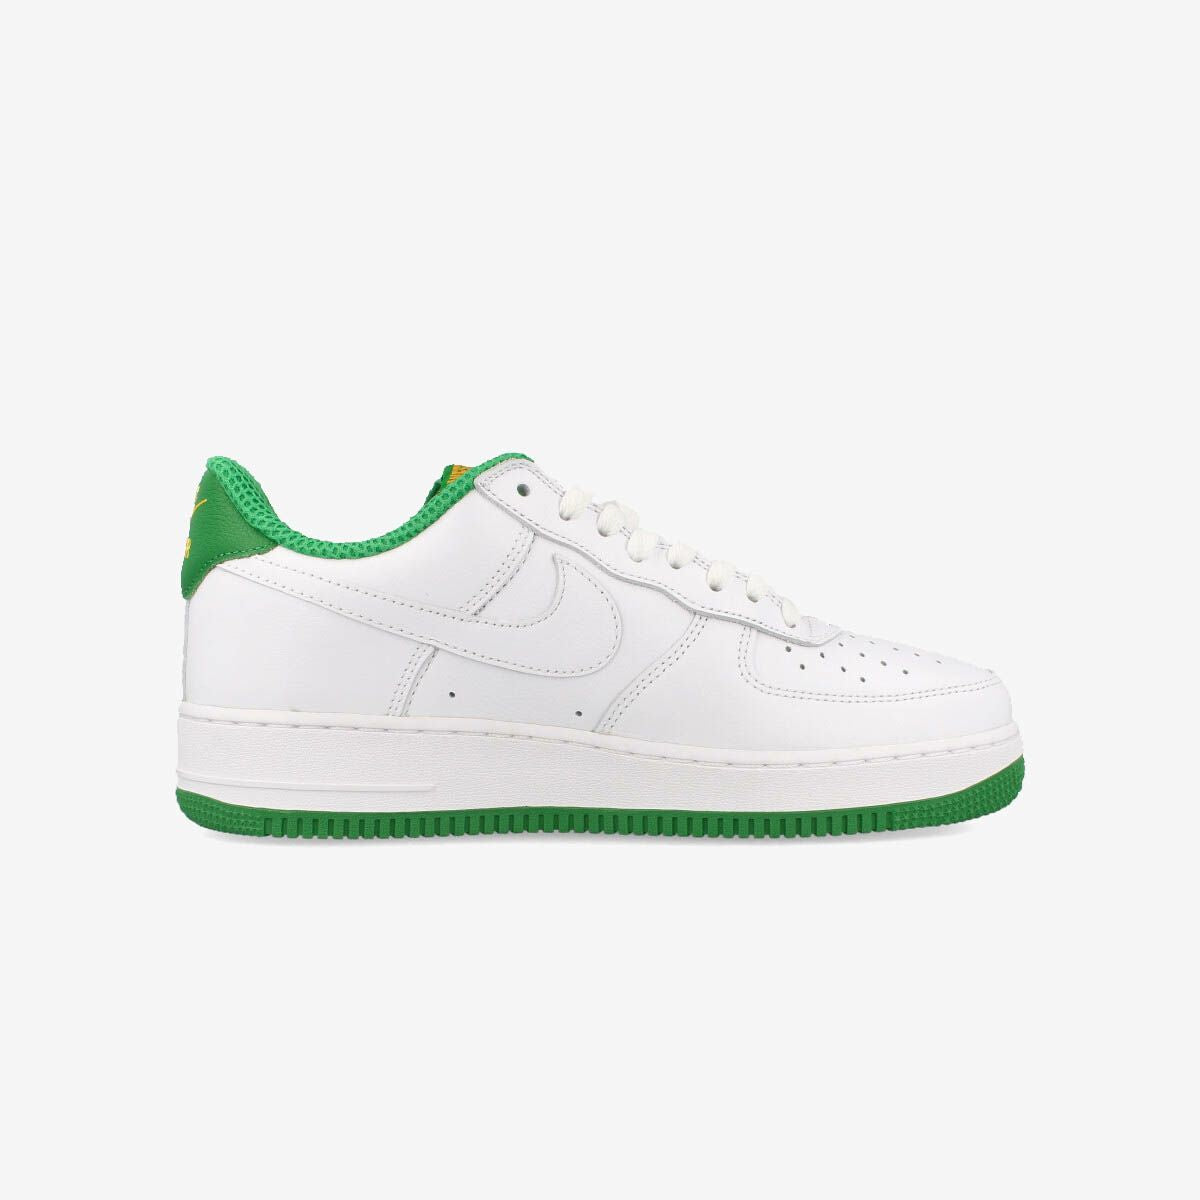 NIKE AIR FORCE 1 LOW RETRO QS WHITE/WHITE/CLASSIC GREEN 【WEST